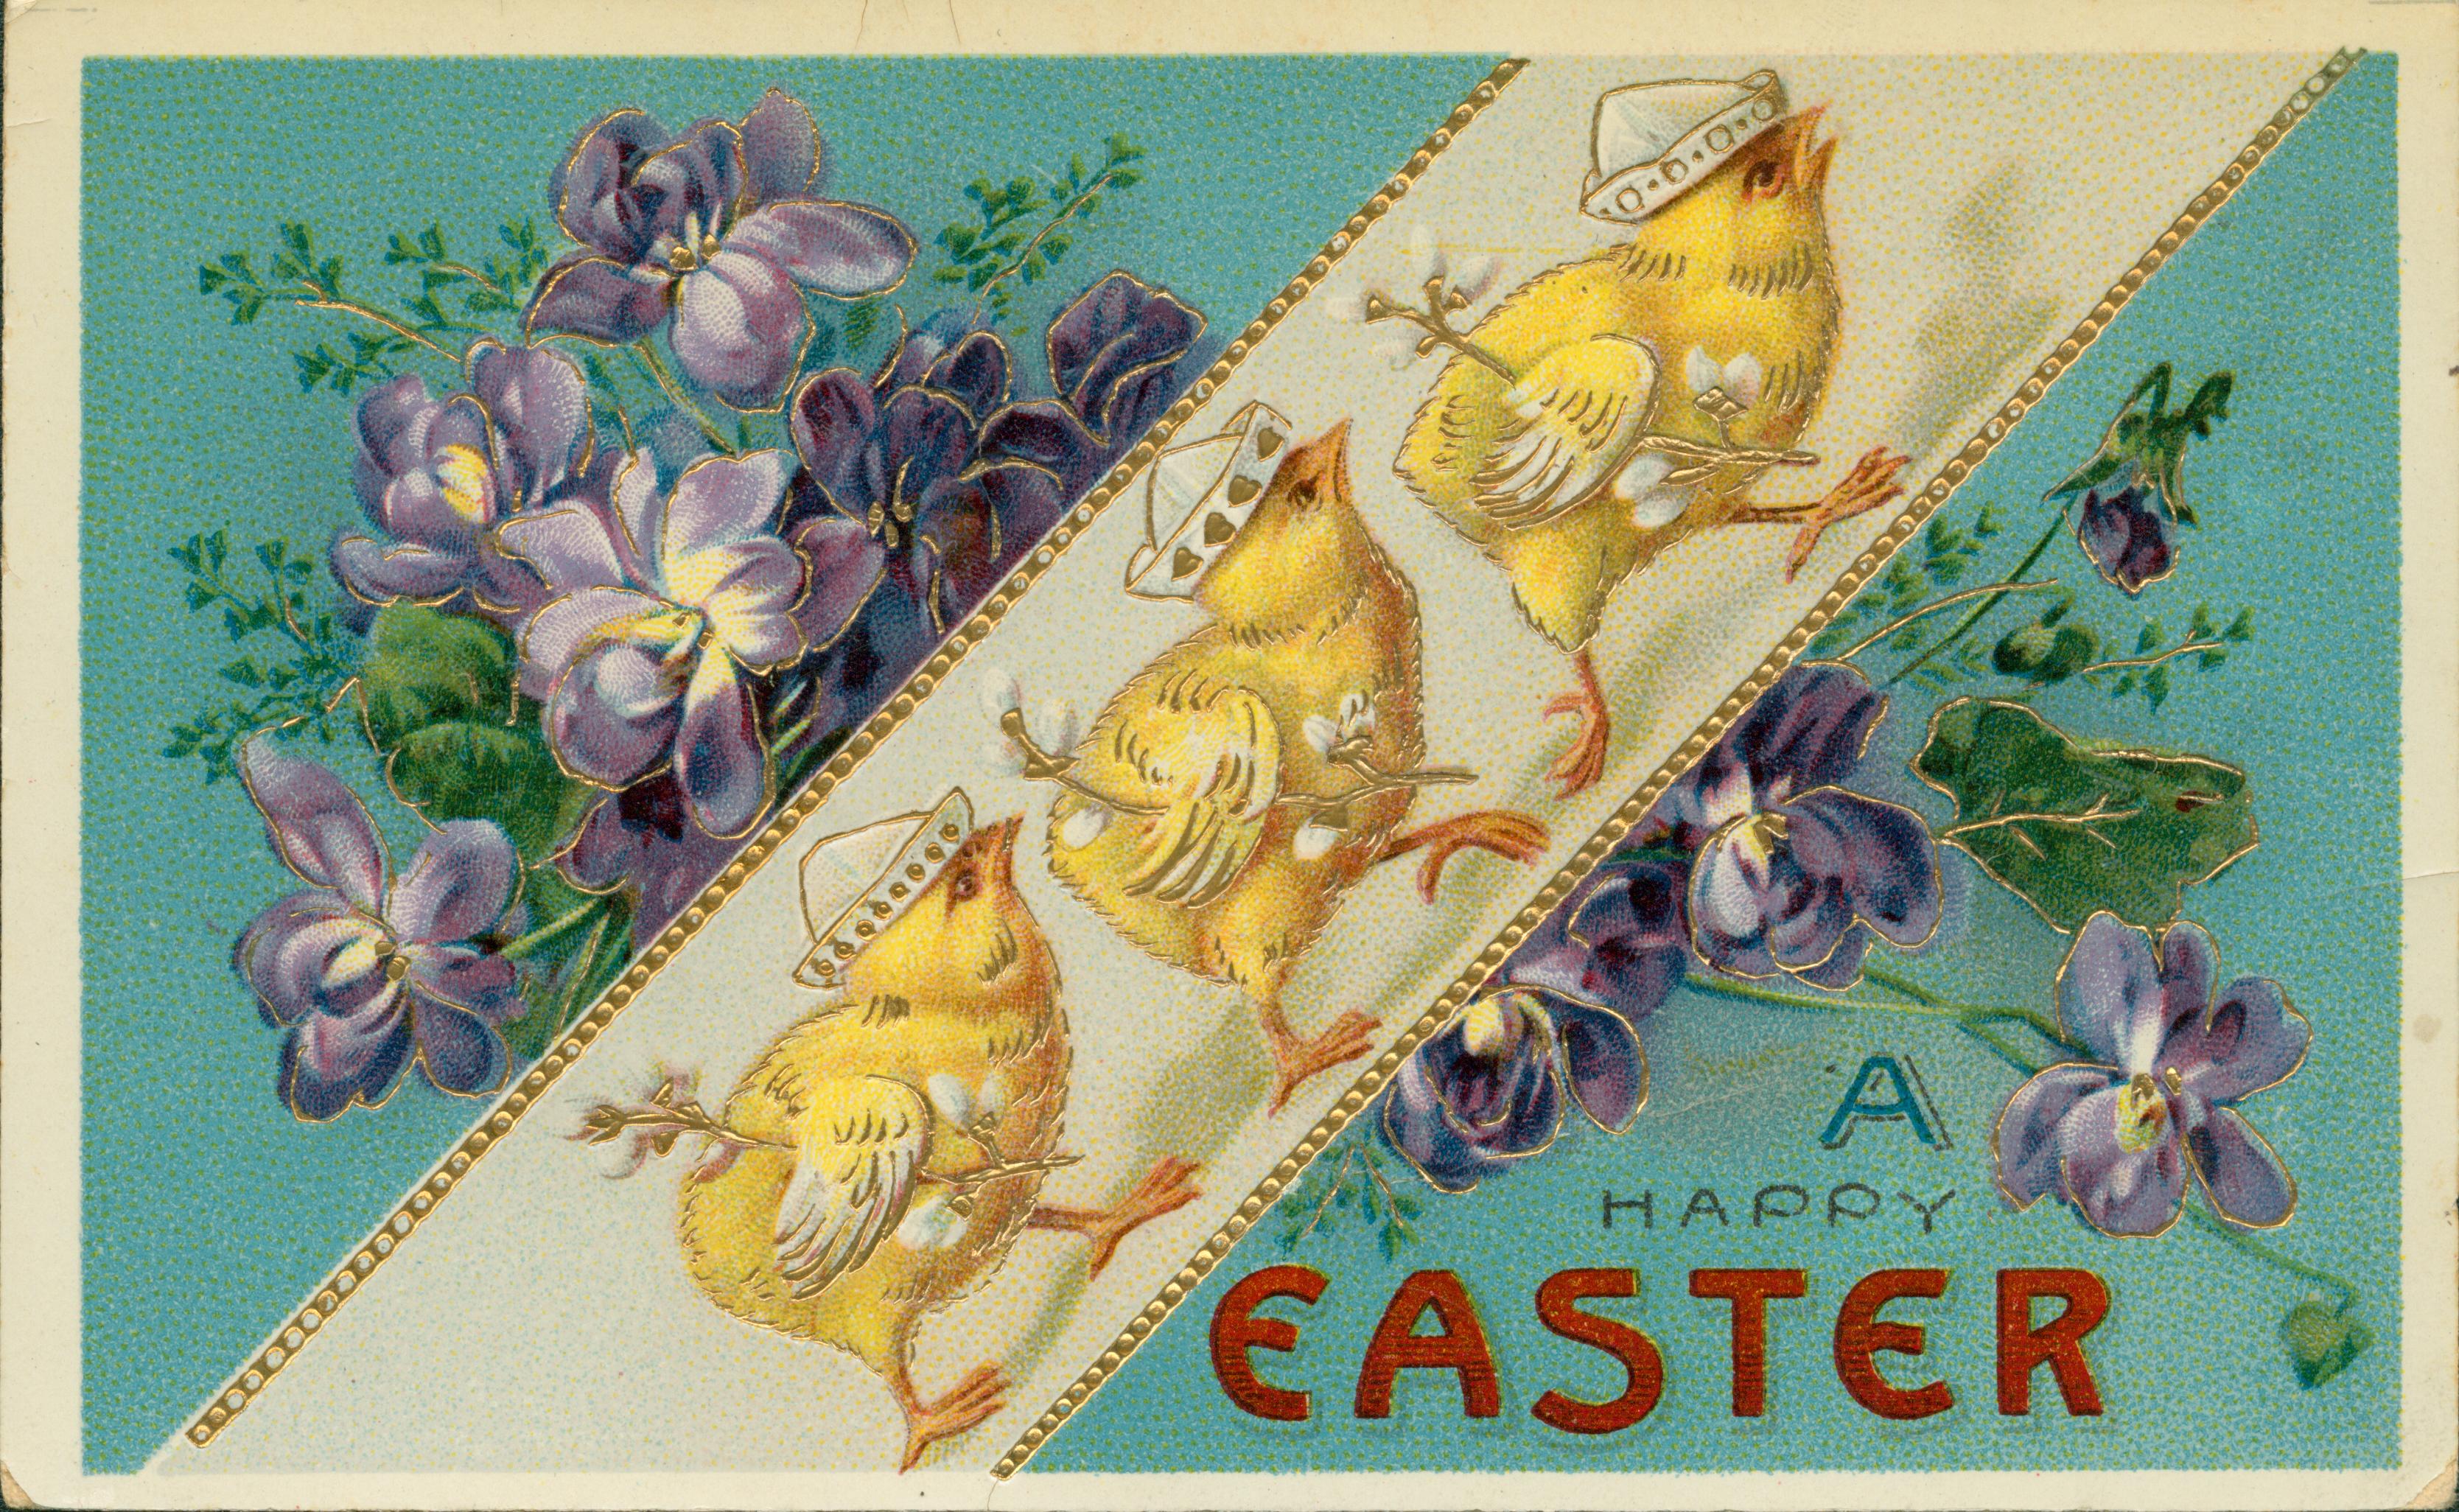 Three chicks in a row wearing hats with flowers on either side.